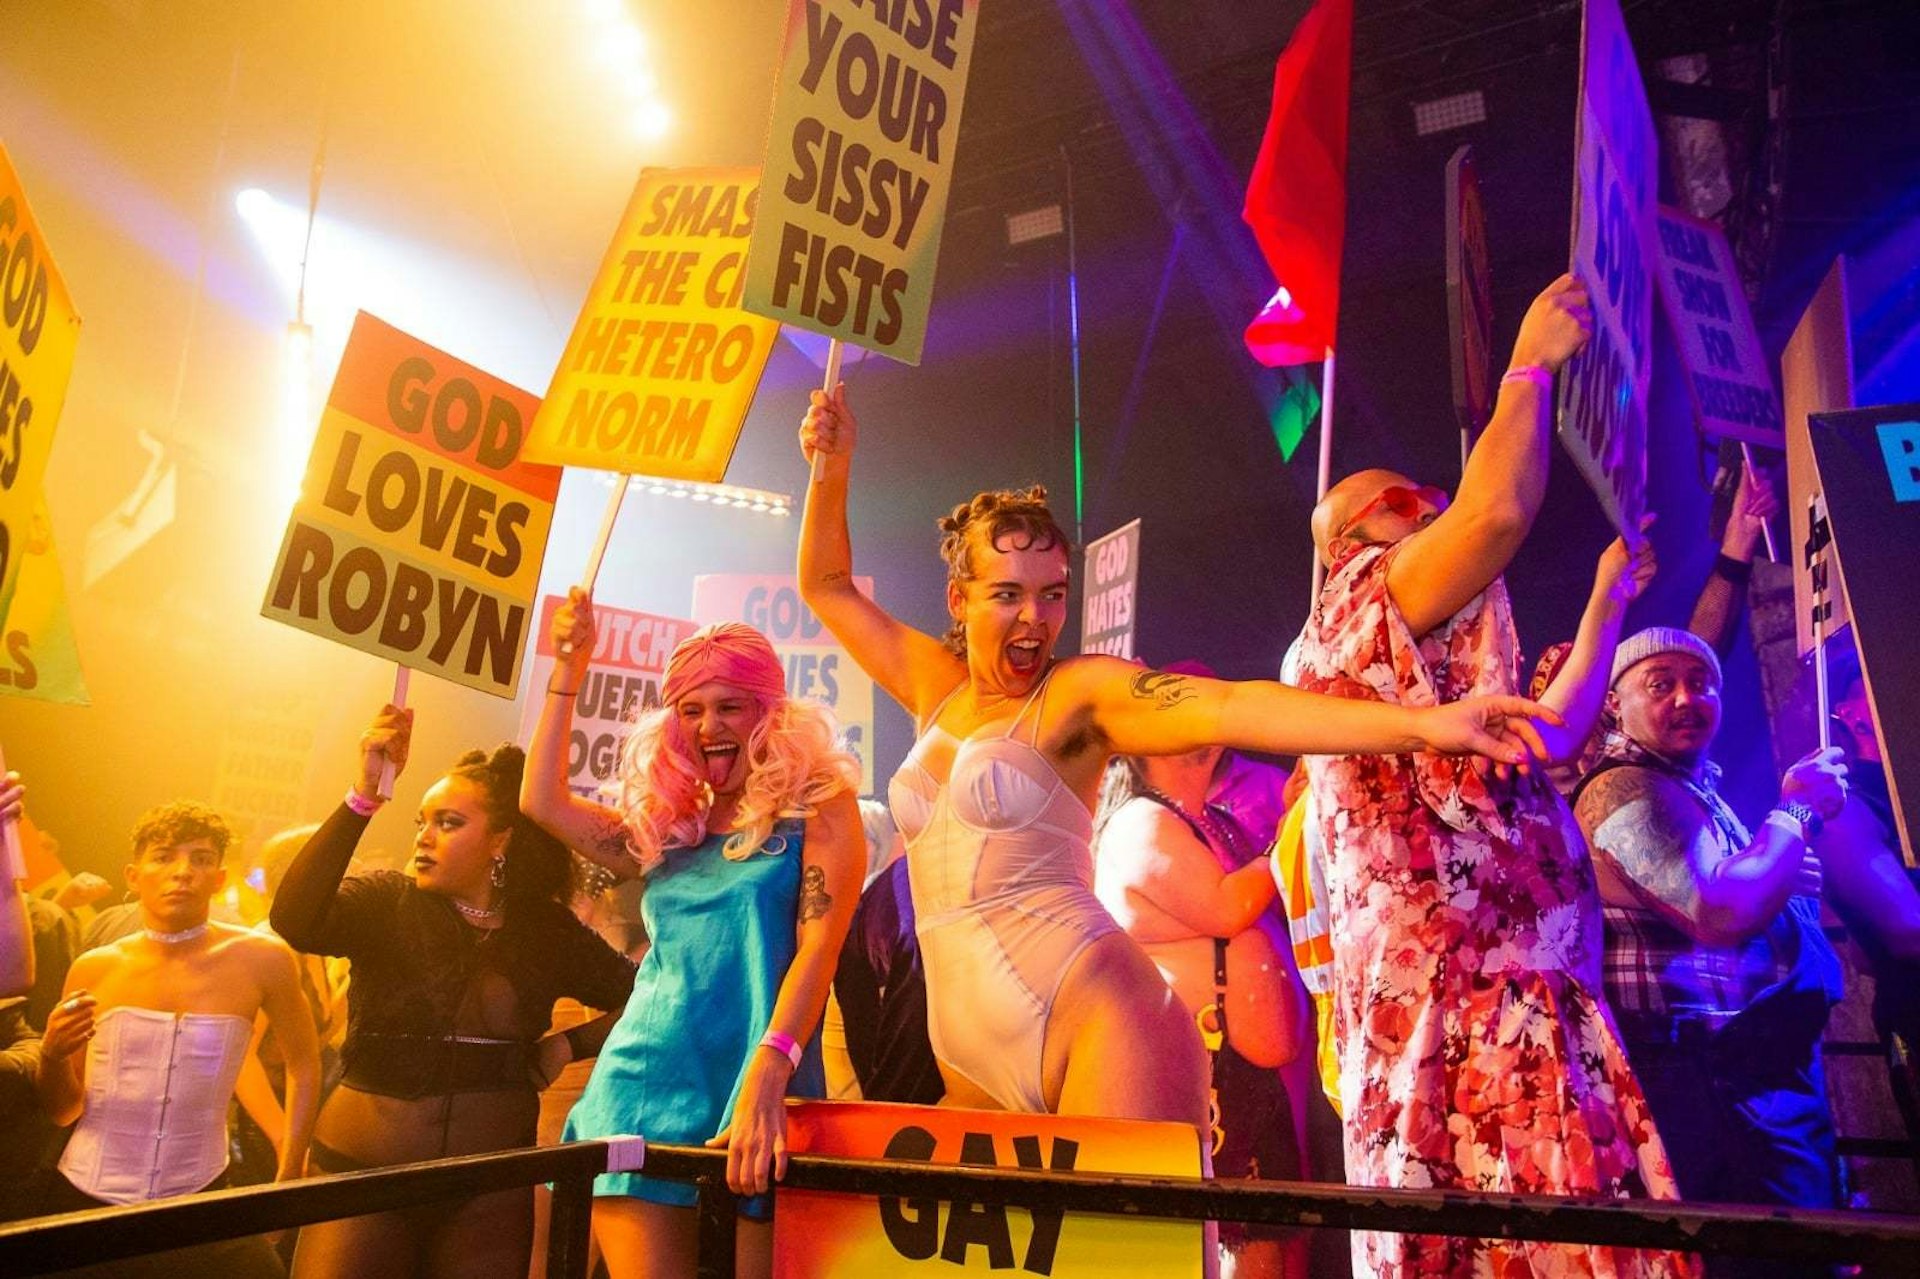 The UK's largest queer rave is defiant in the face of hate